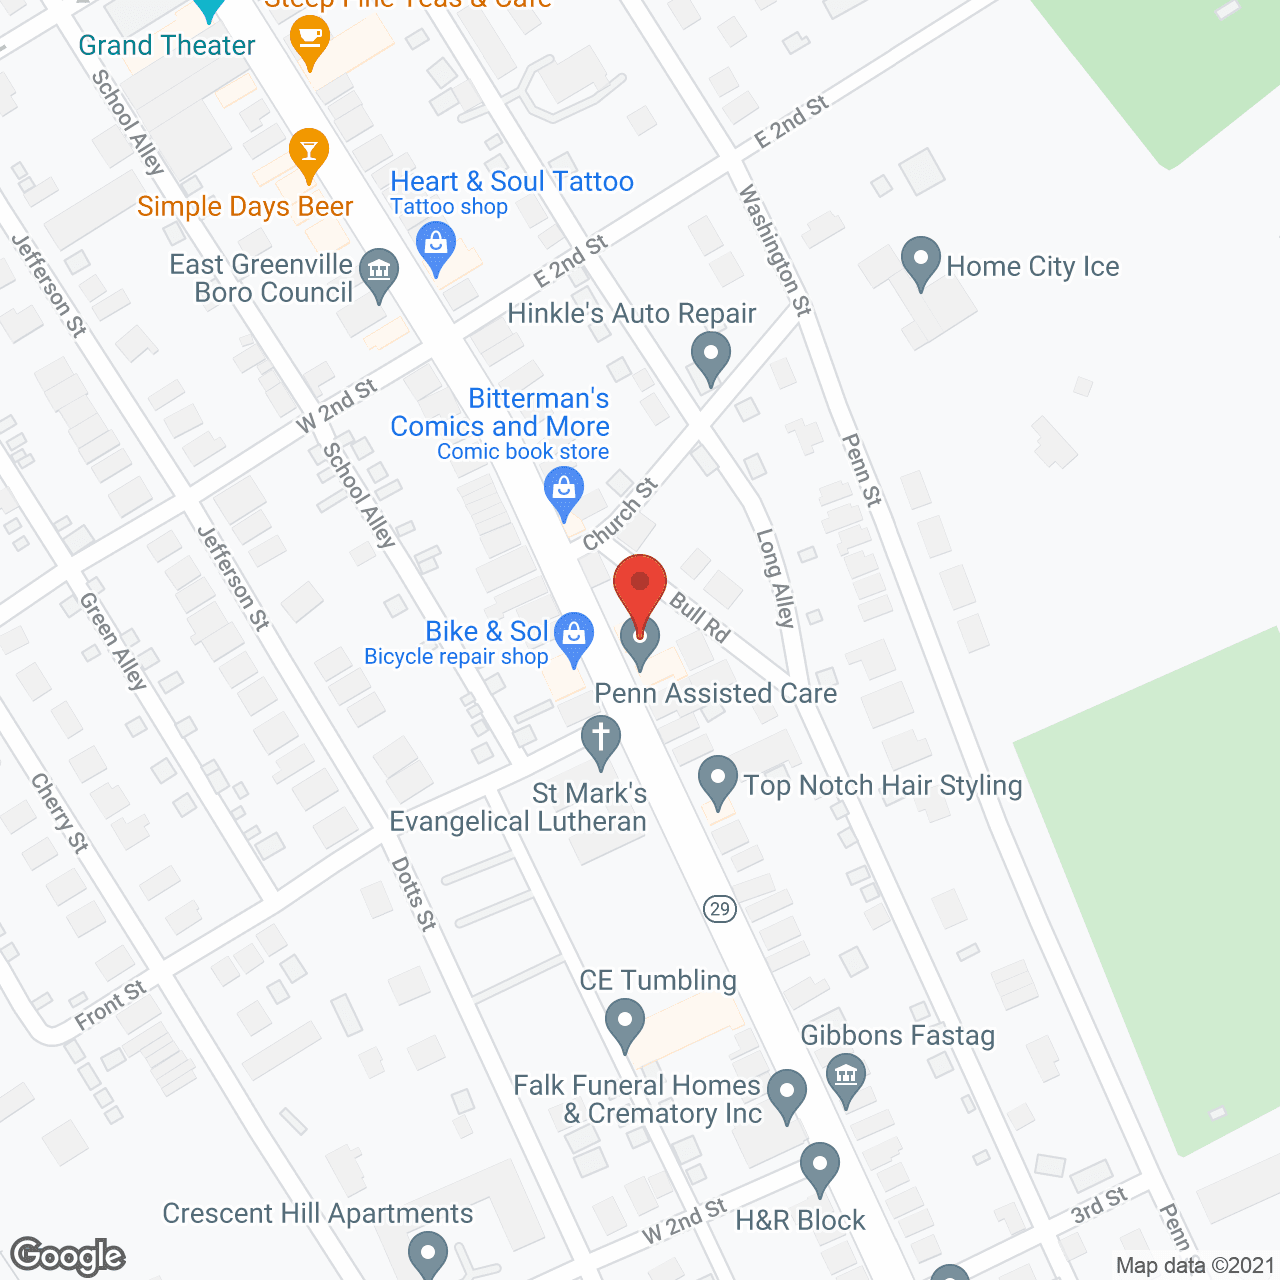 Penn Assisted Care in google map